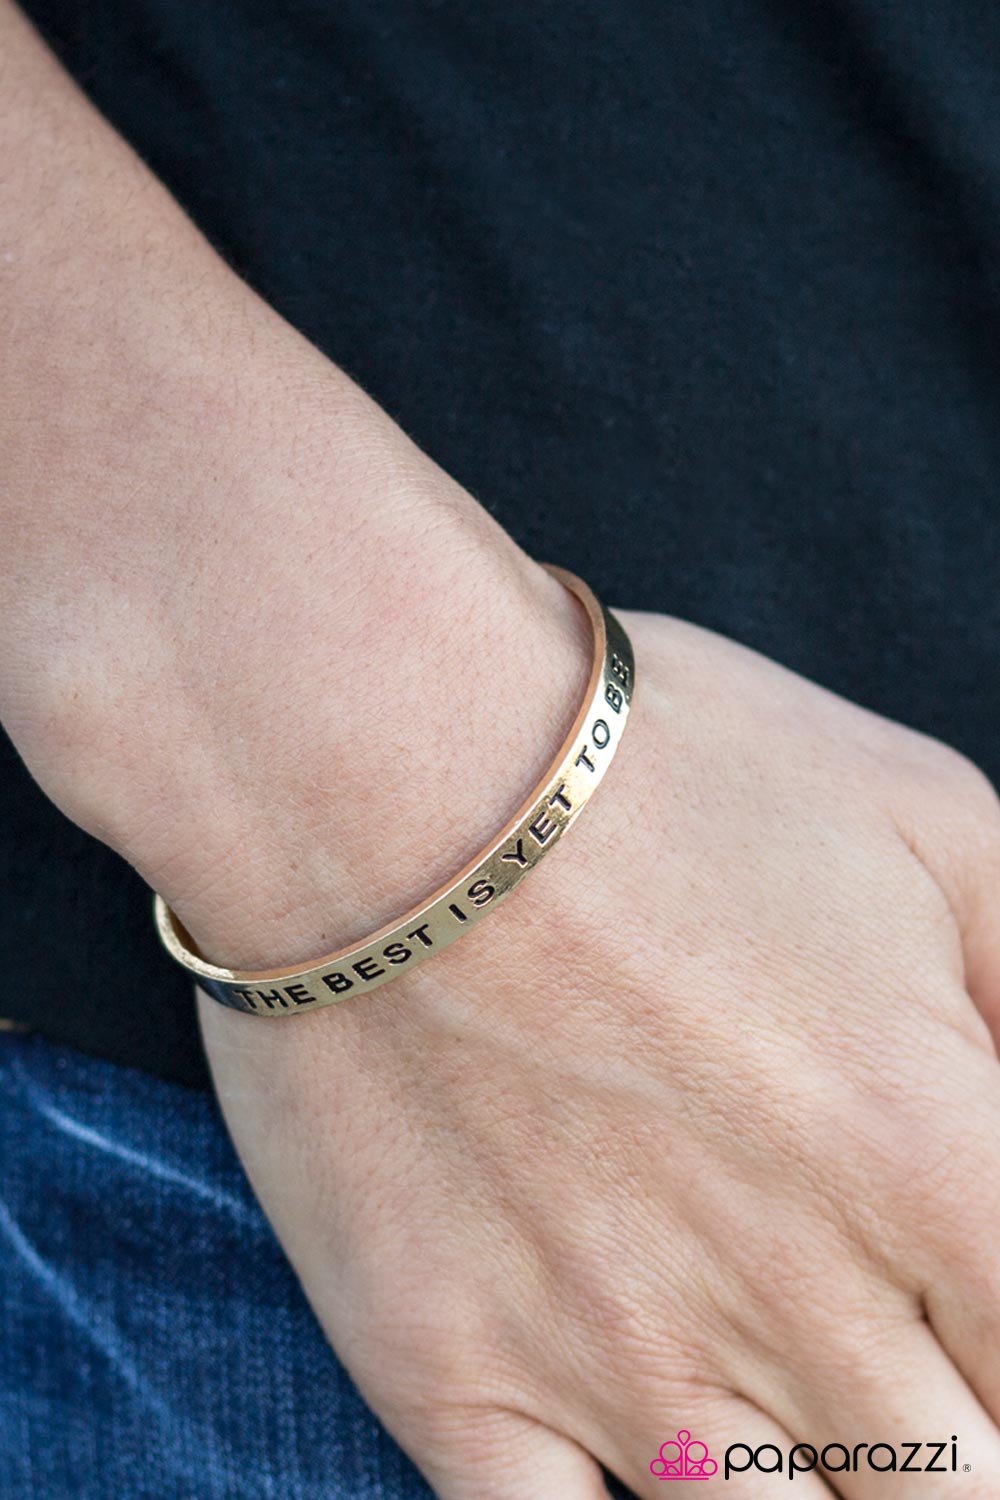 The Best Is Yet To Be - Gold - Paparazzi bracelet